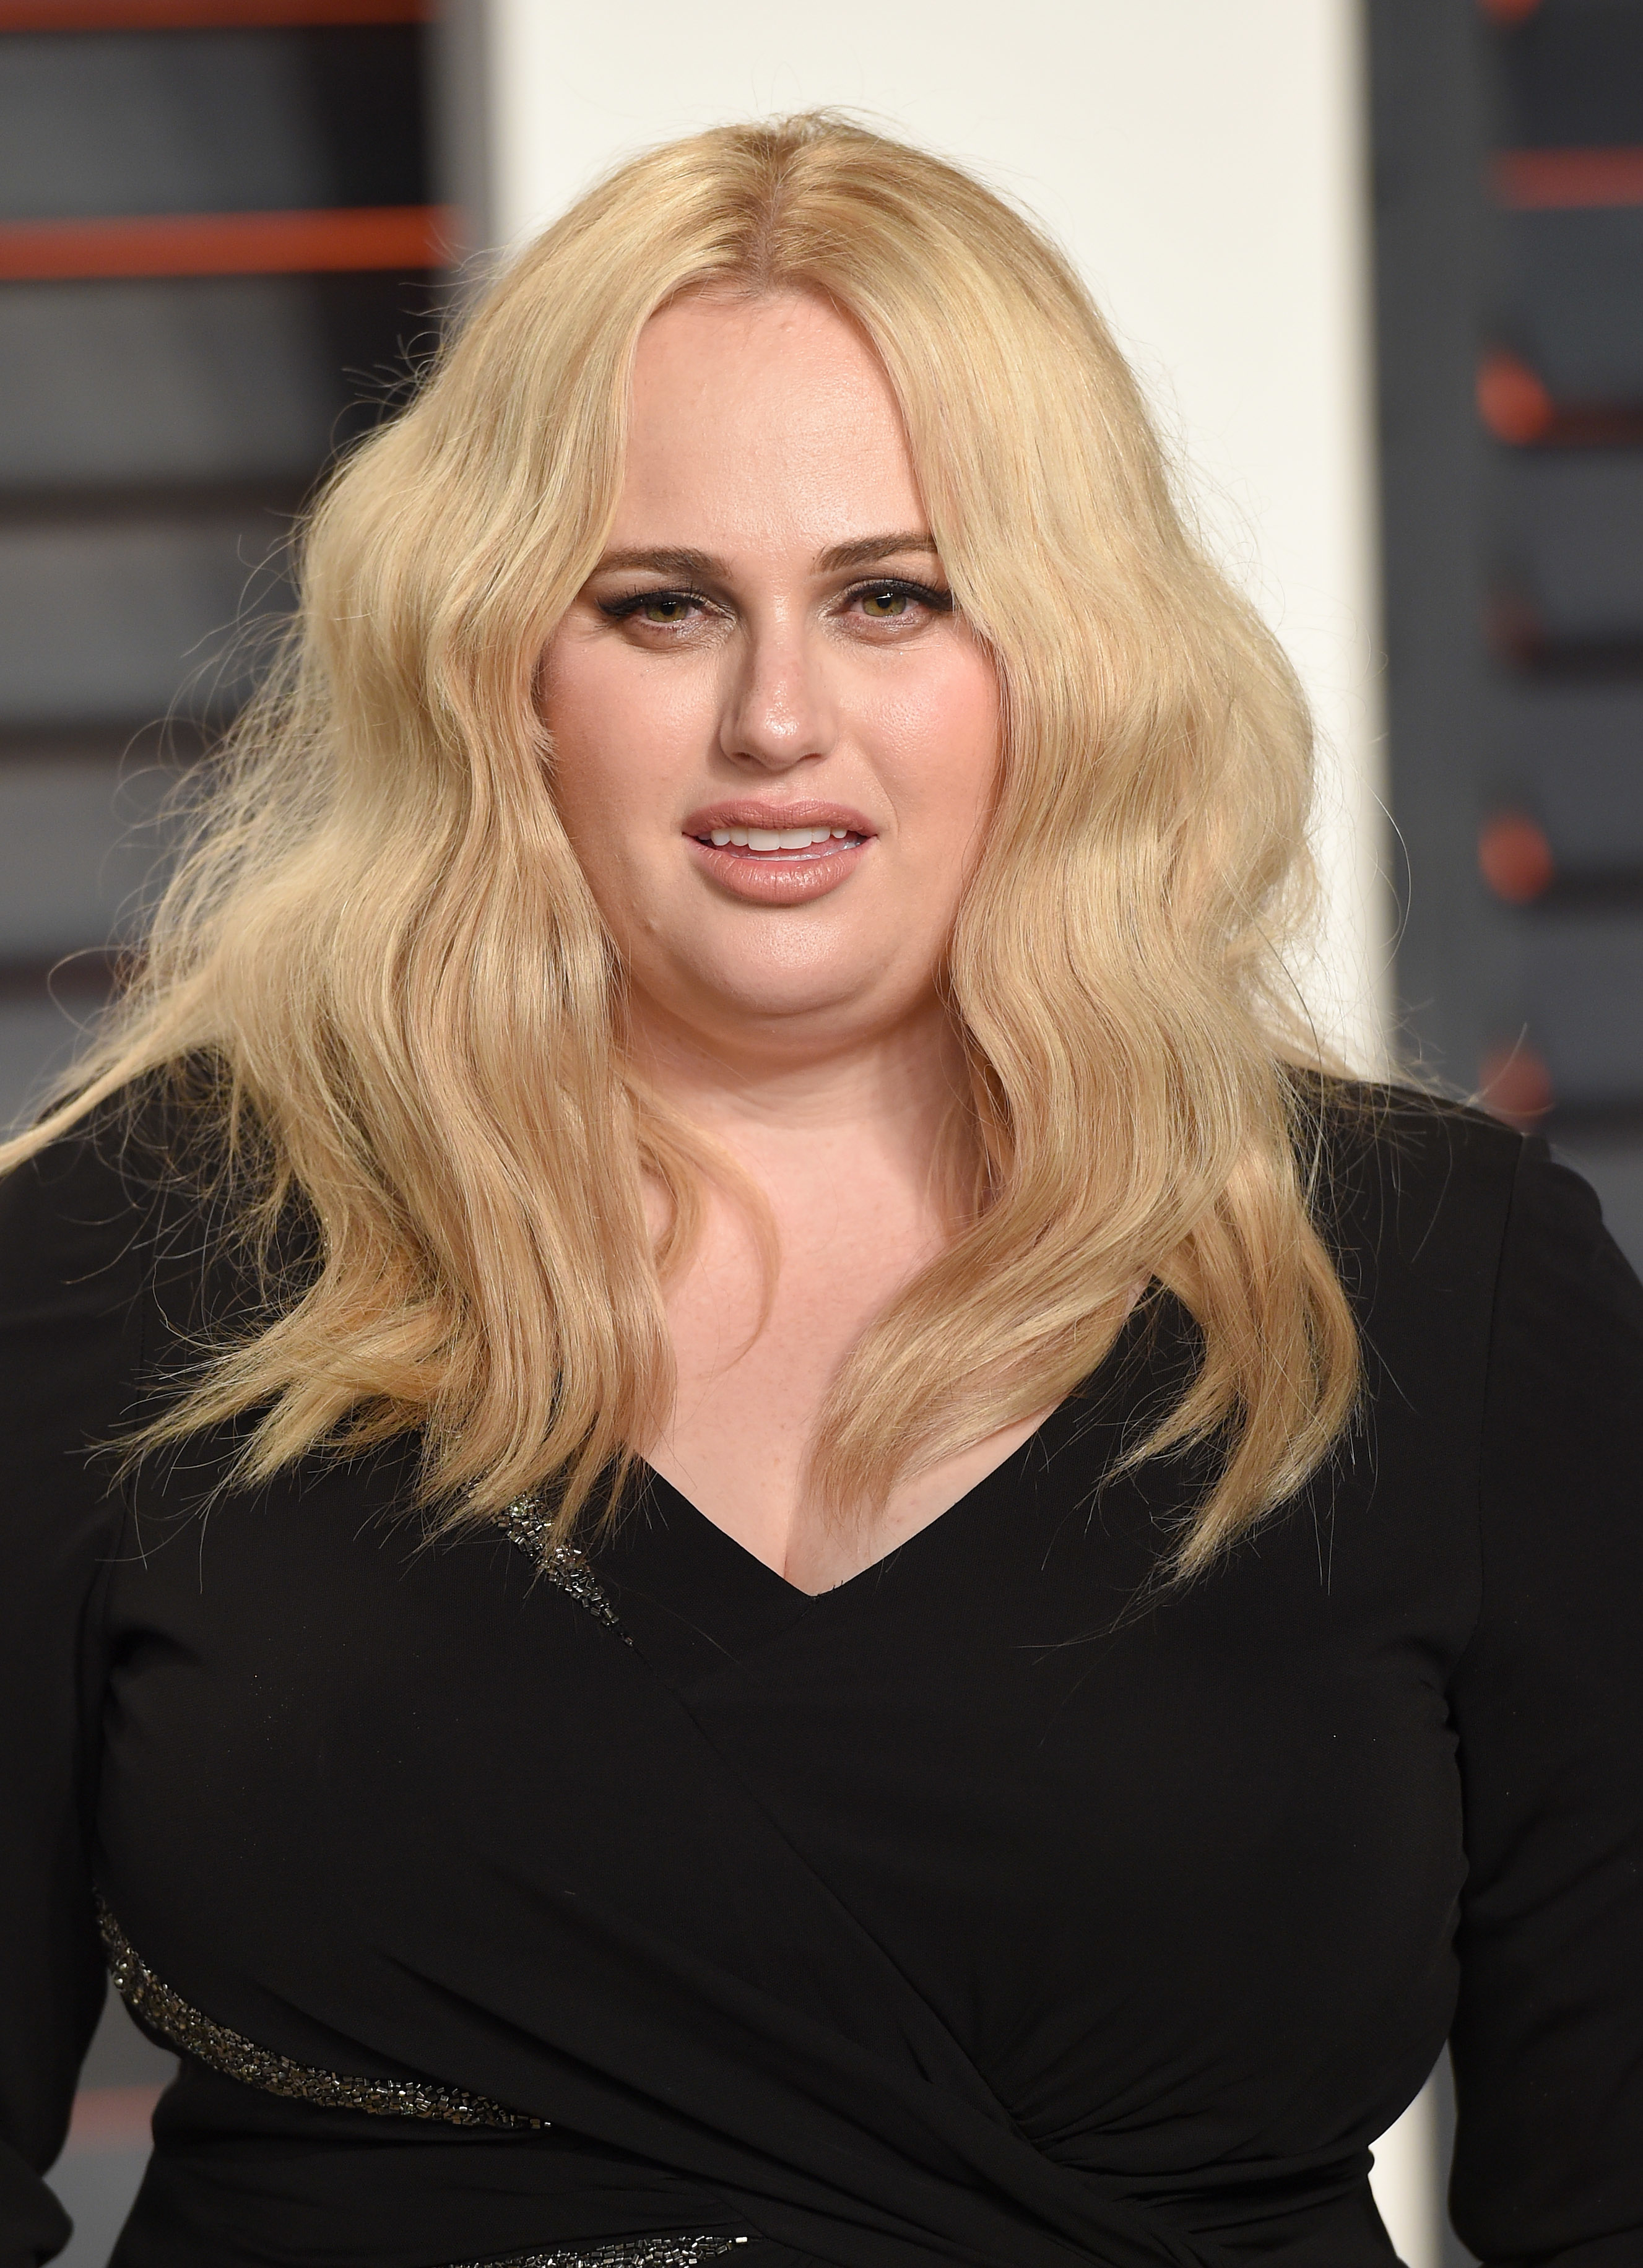 Rebel Wilson in a dress with a v-neckline and sparkle detail, posing at an event